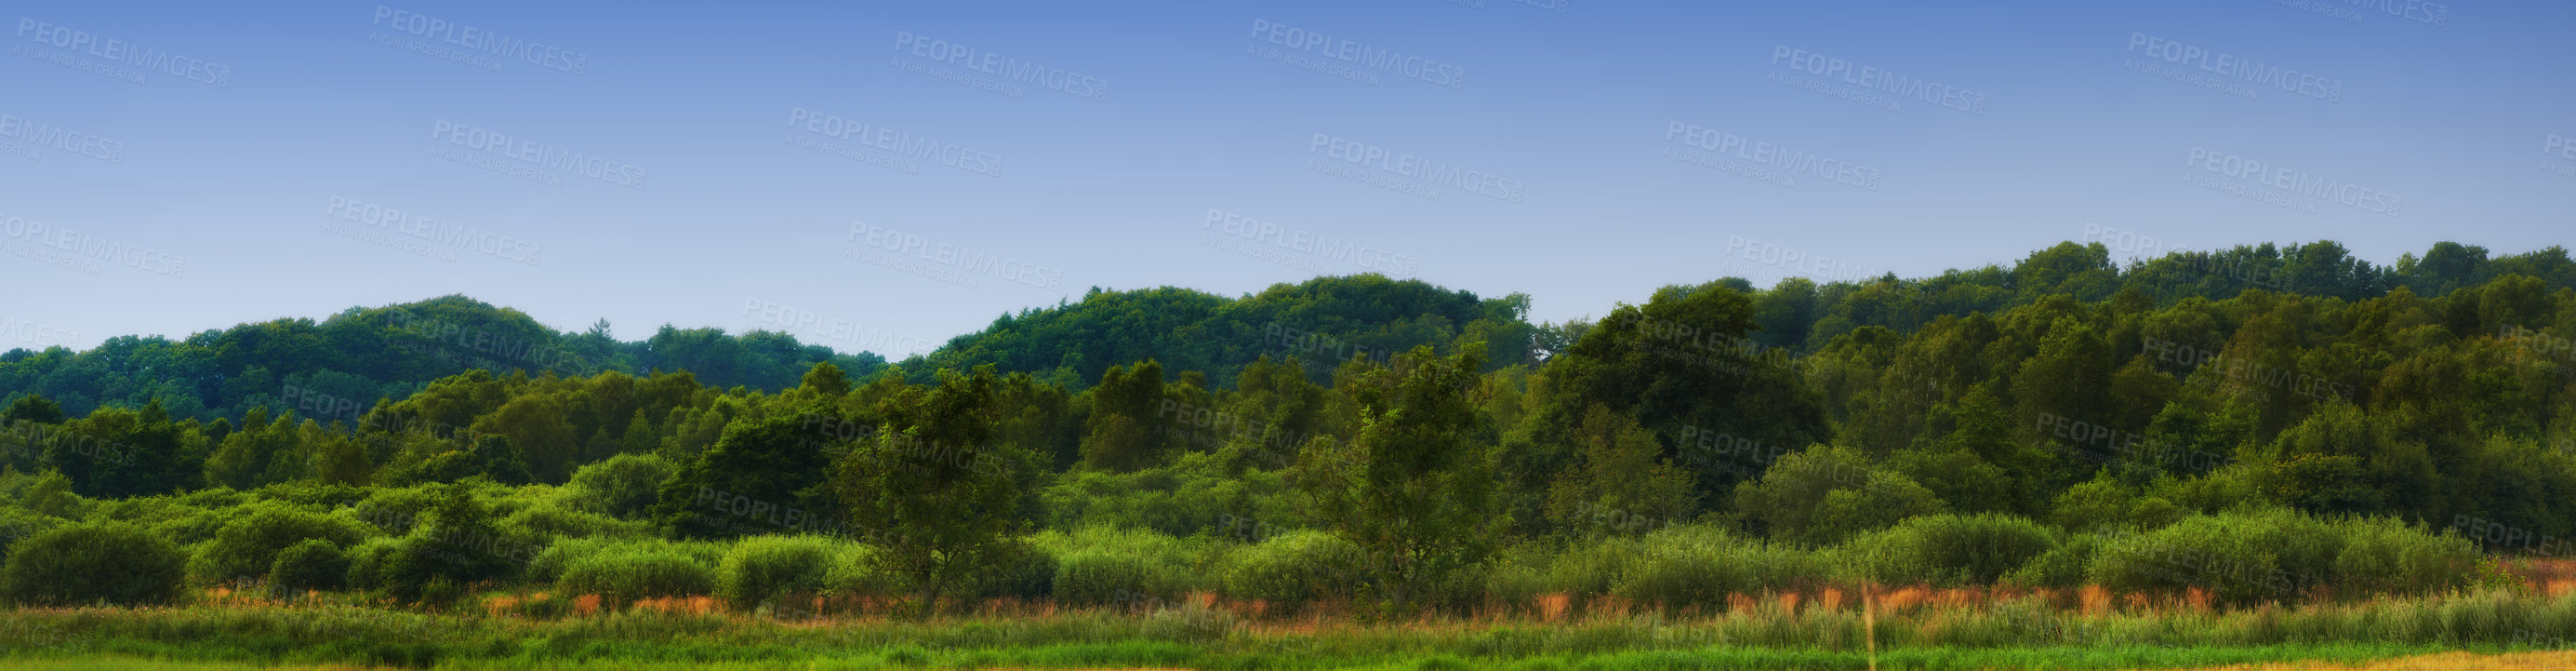 Buy stock photo Scenic and peaceful landscape of trees growing in a remote and uncultivated forest in Norway with sky copy space. Overgrown and lush green woods in a quiet and tranquil environment in mother nature